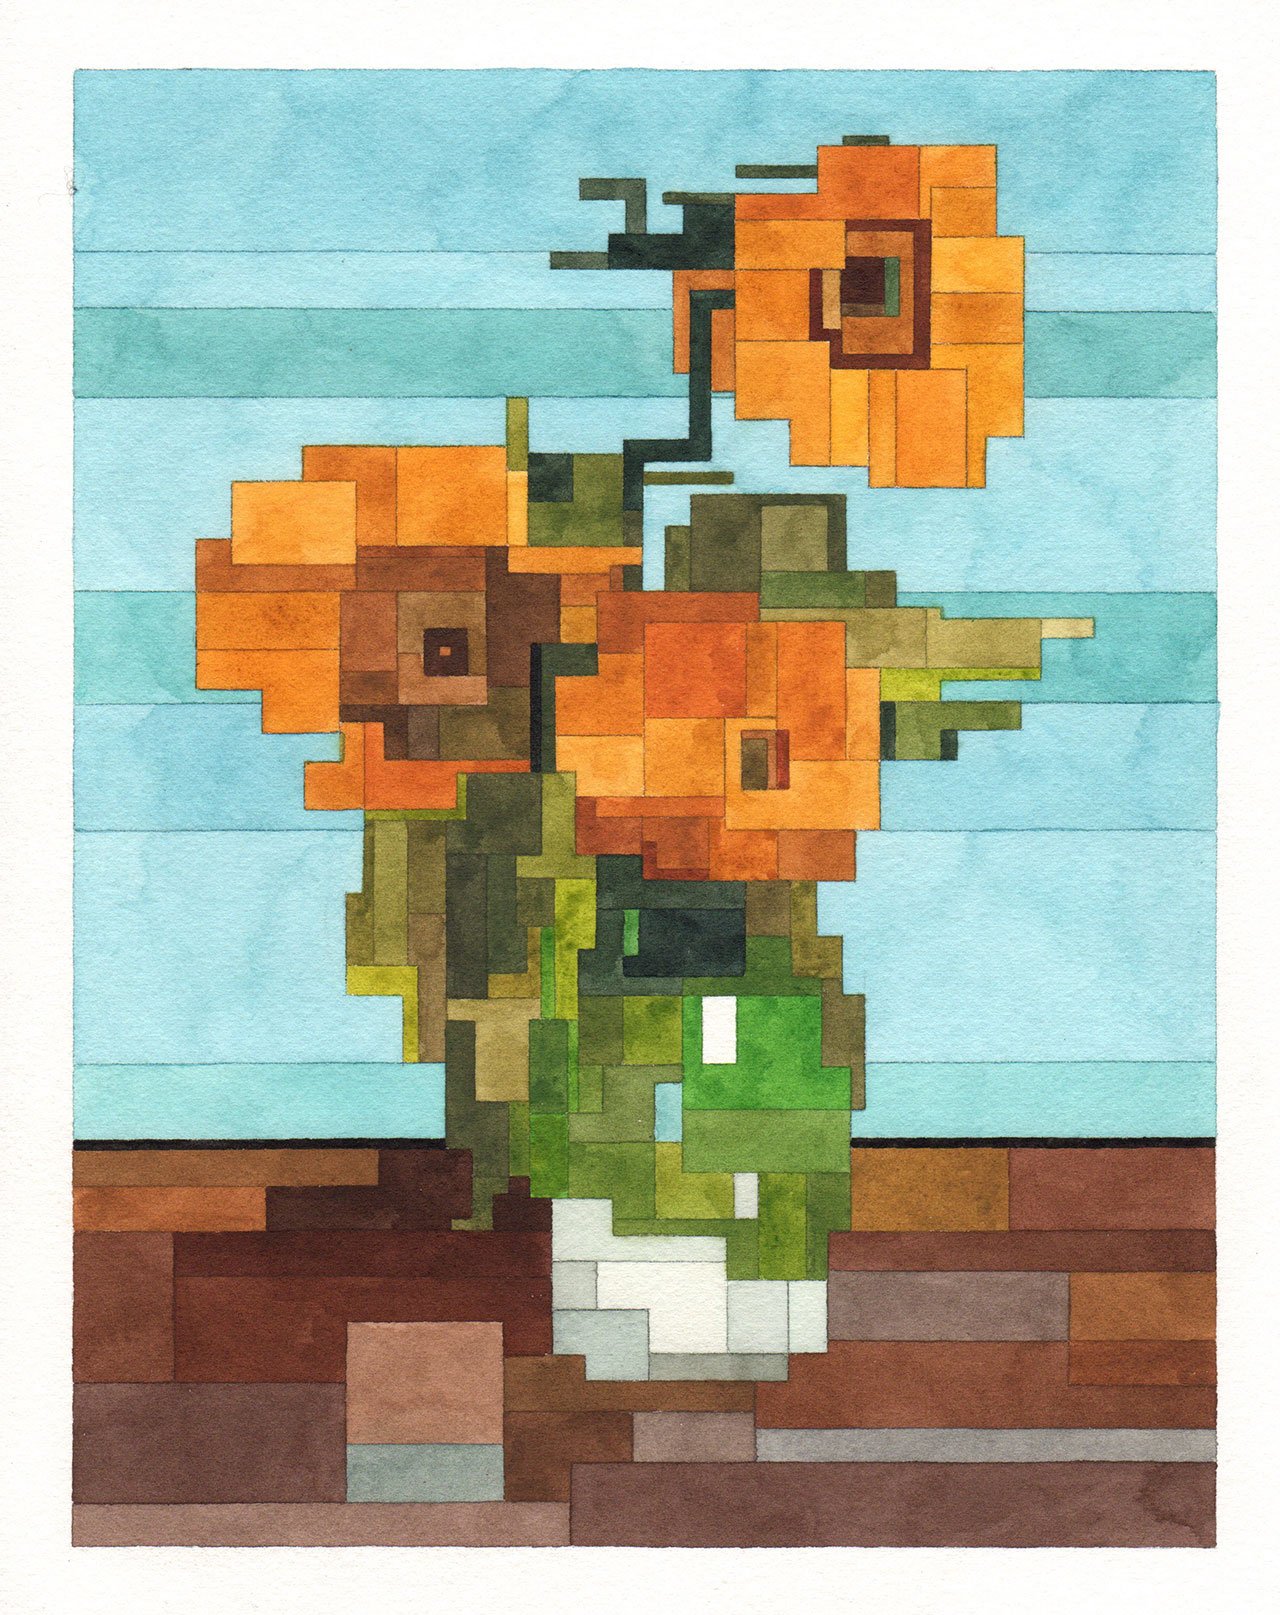 Three Sunflowers in a Vase, Art History 101 series by Adam Lister.(Original Painting by Vincent van Gogh, 1888).